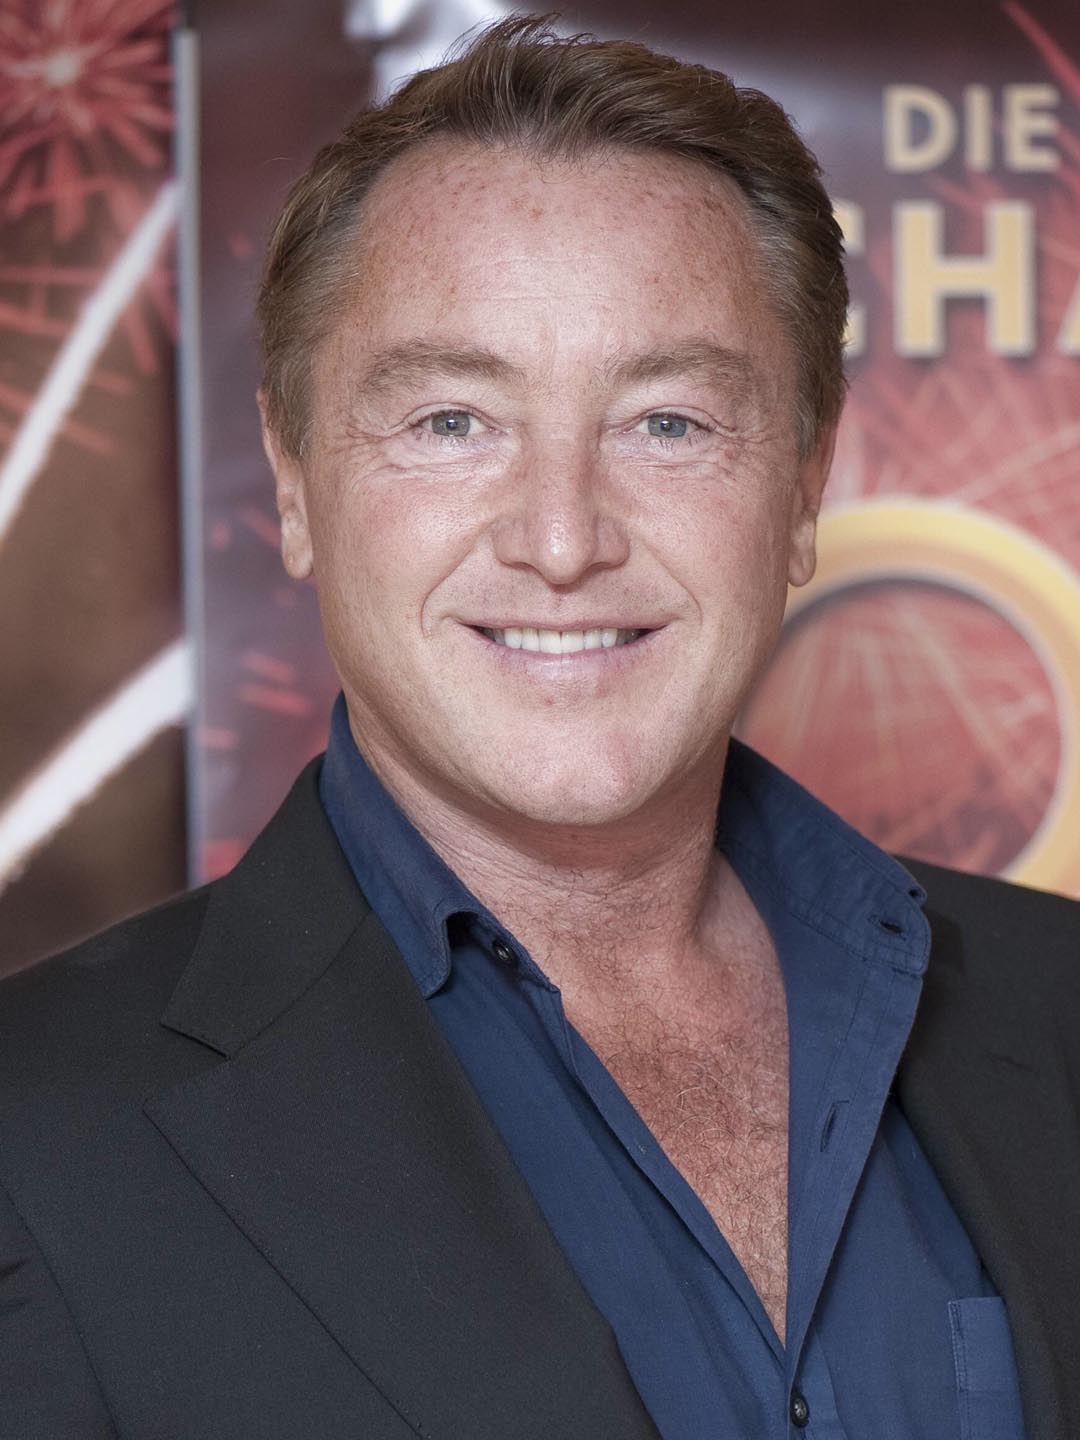 The 64-year old son of father Michael Flatley Sr. and mother Eilish Flatley Michael Flatley in 2022 photo. Michael Flatley earned a  million dollar salary - leaving the net worth at  million in 2022